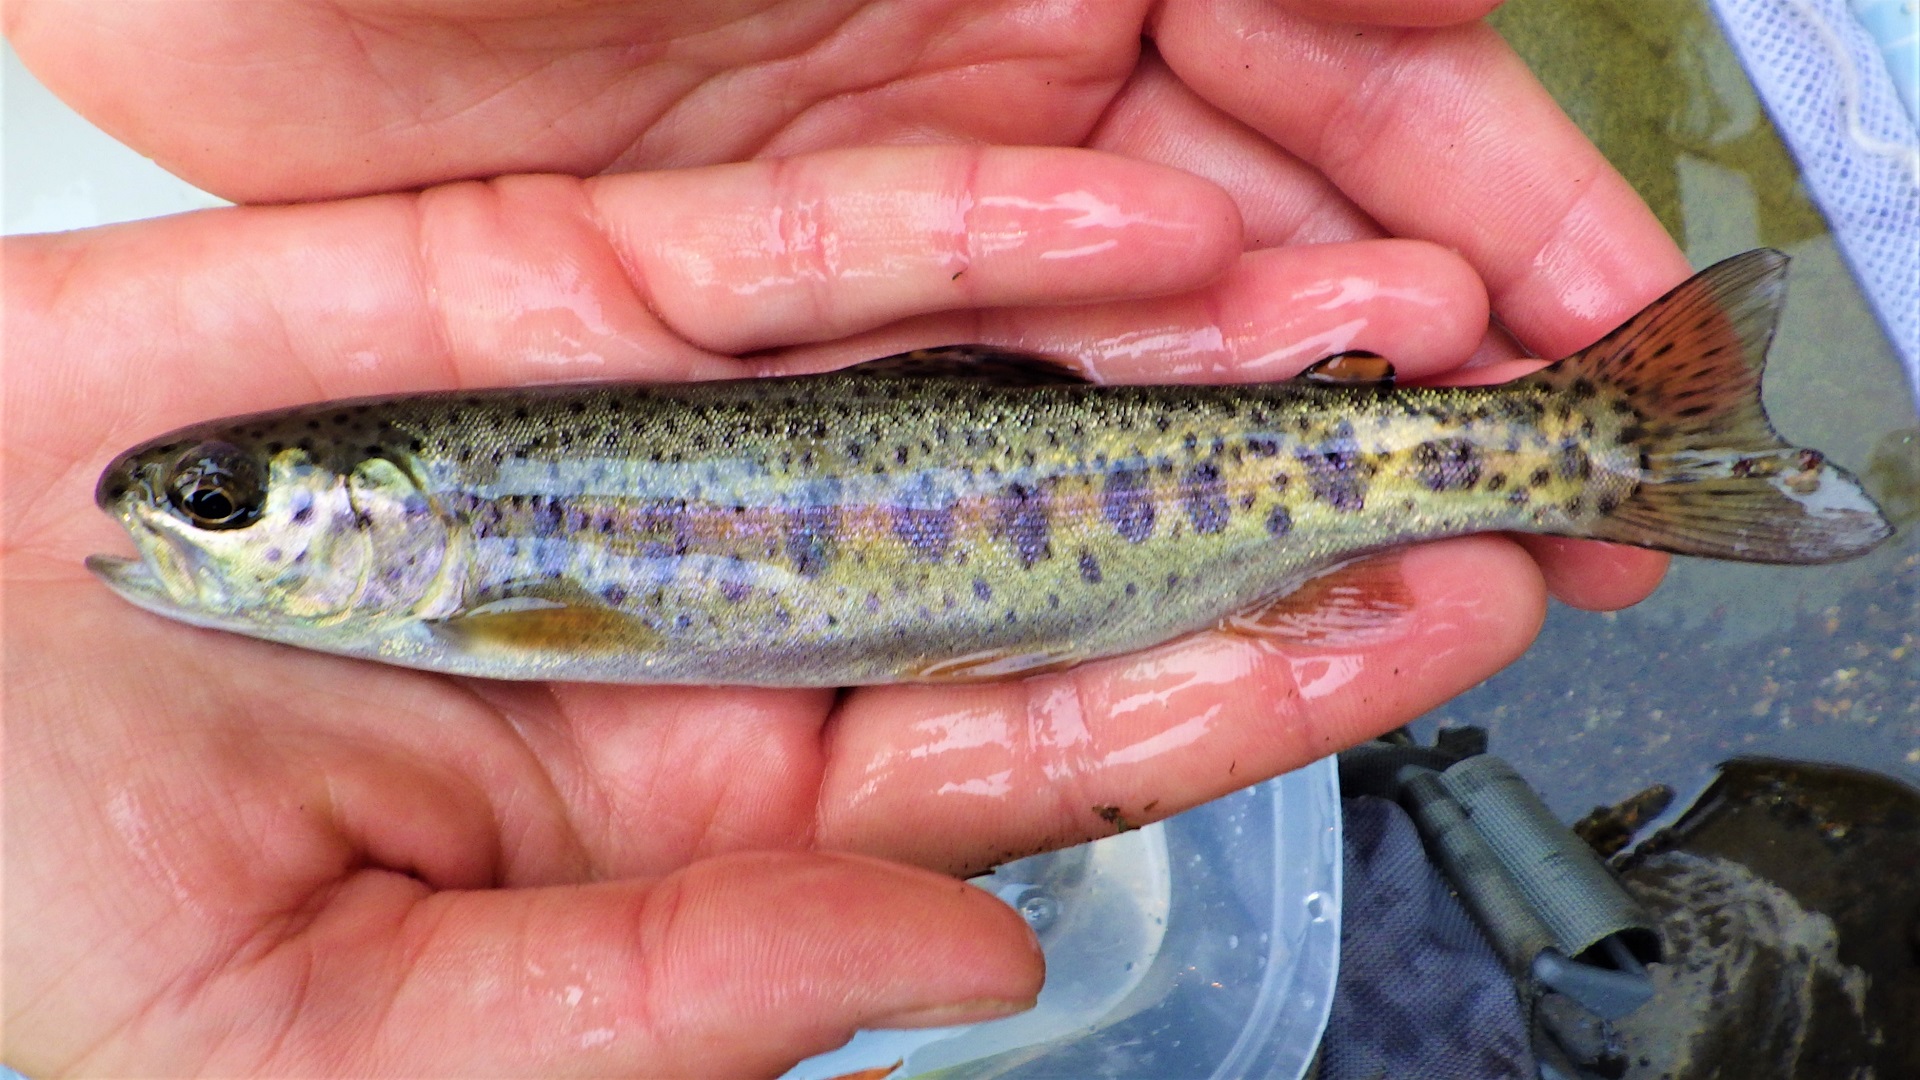 A spotted fish in a crewmember's hands